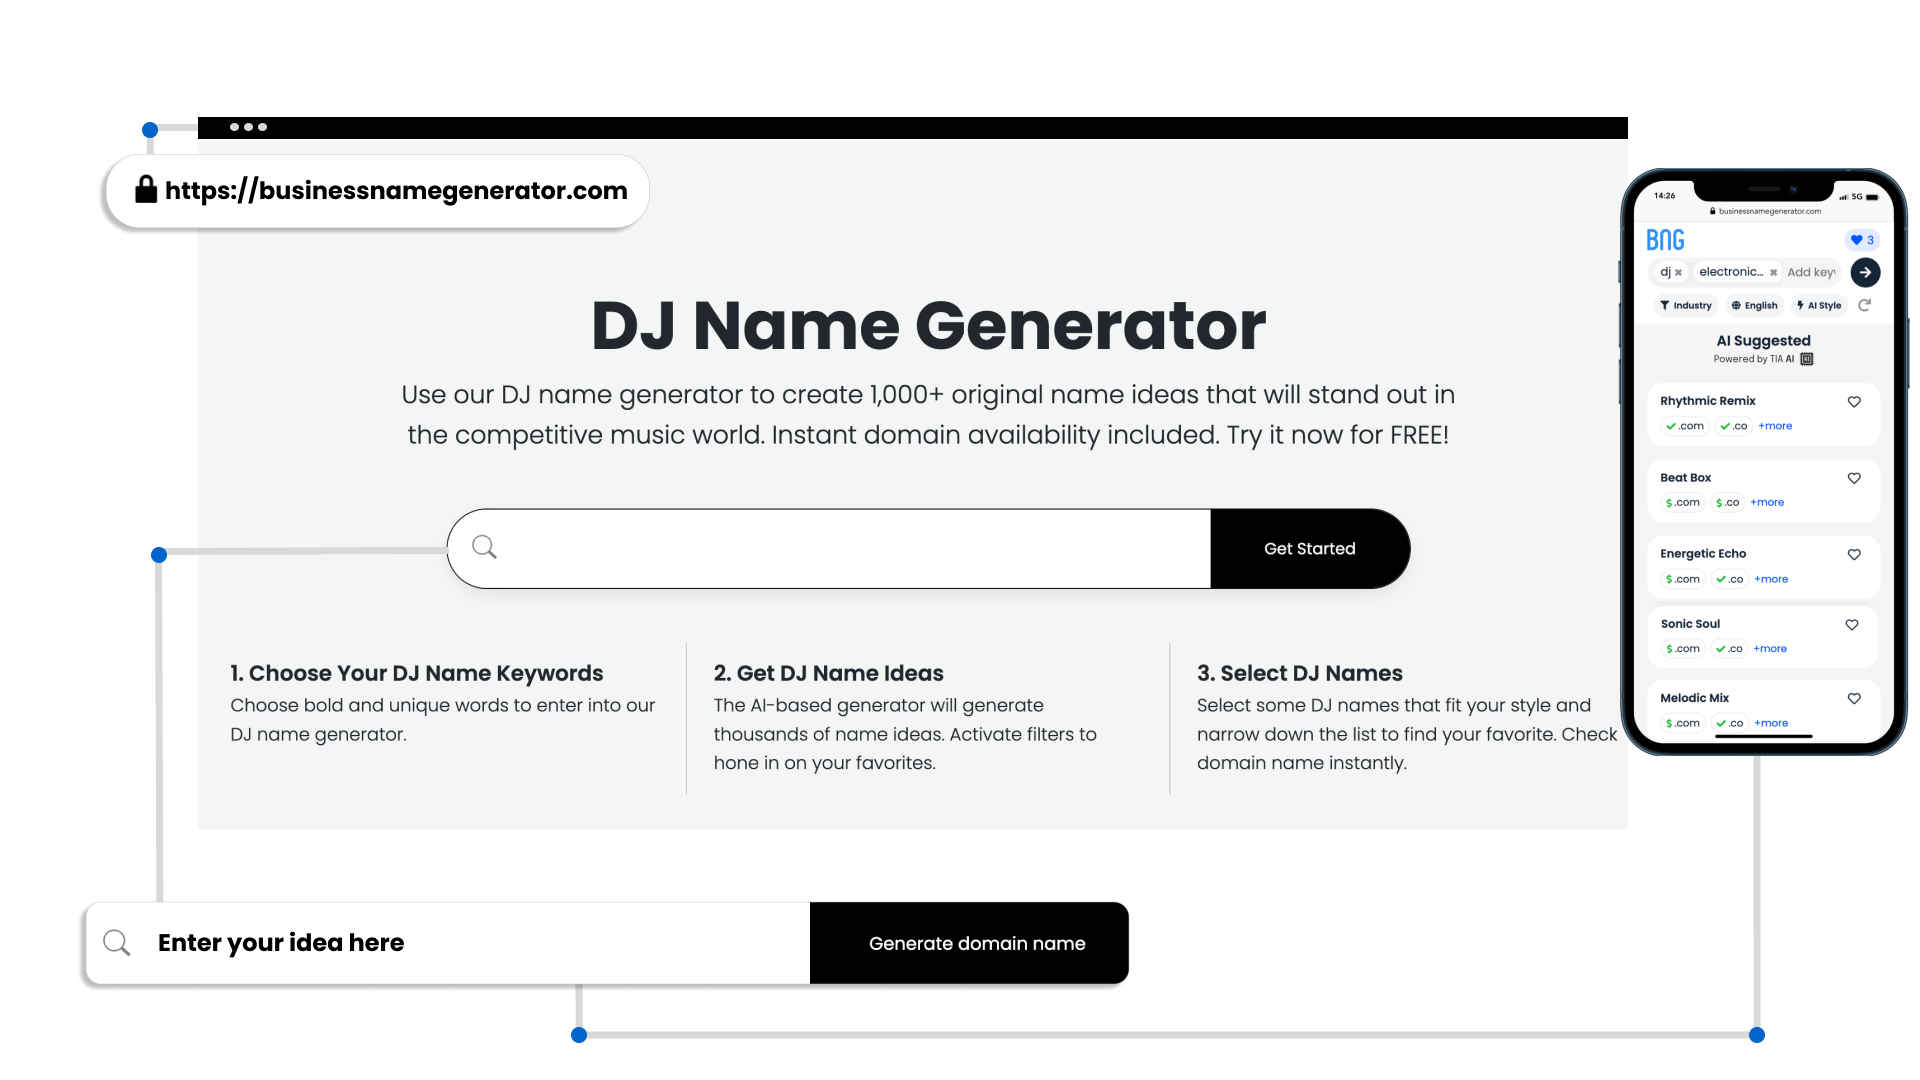 How to use our DJ Name Generator